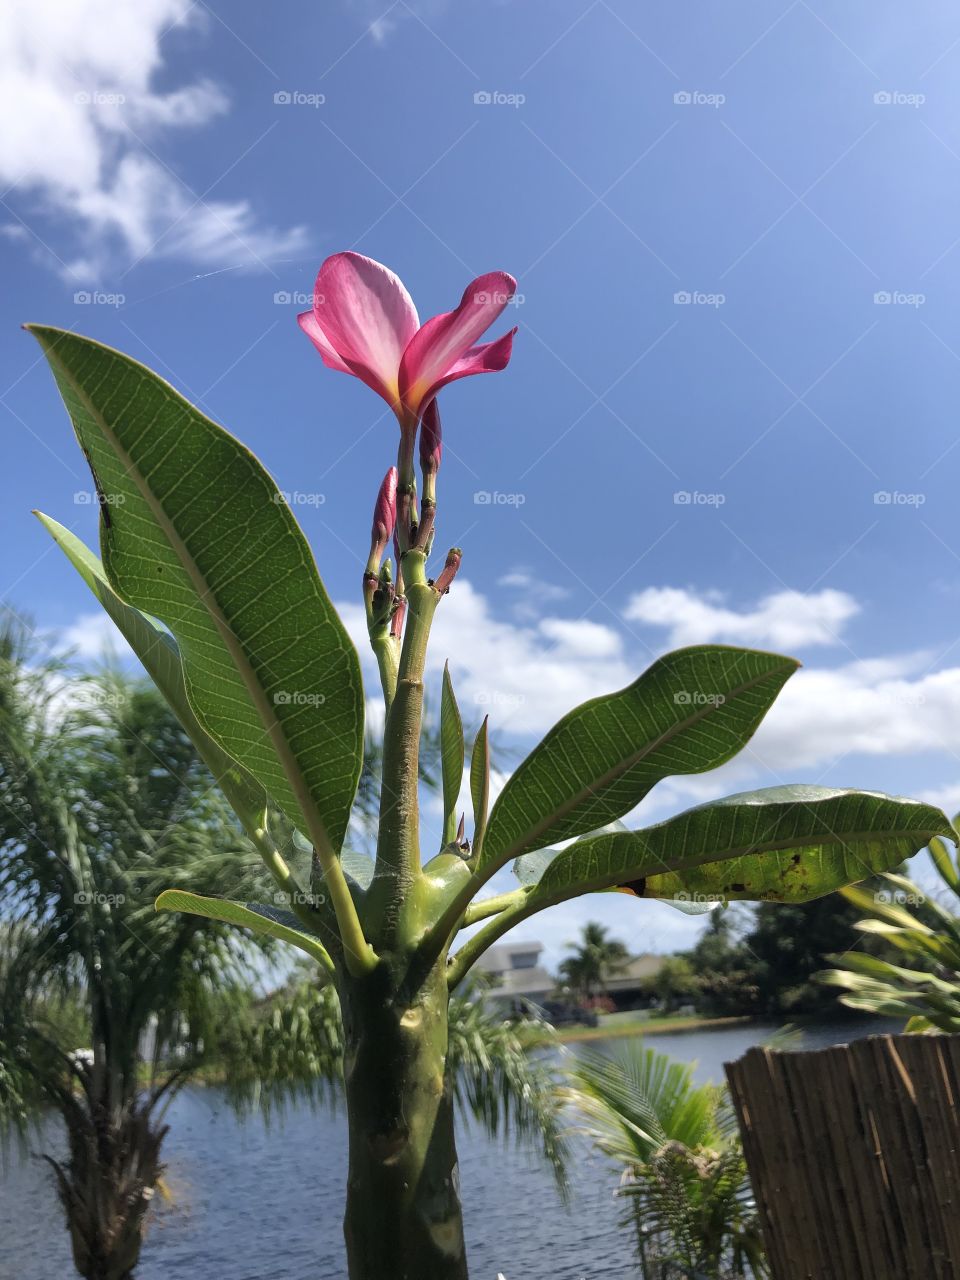 First bloom of the season for this frangipani tree. 